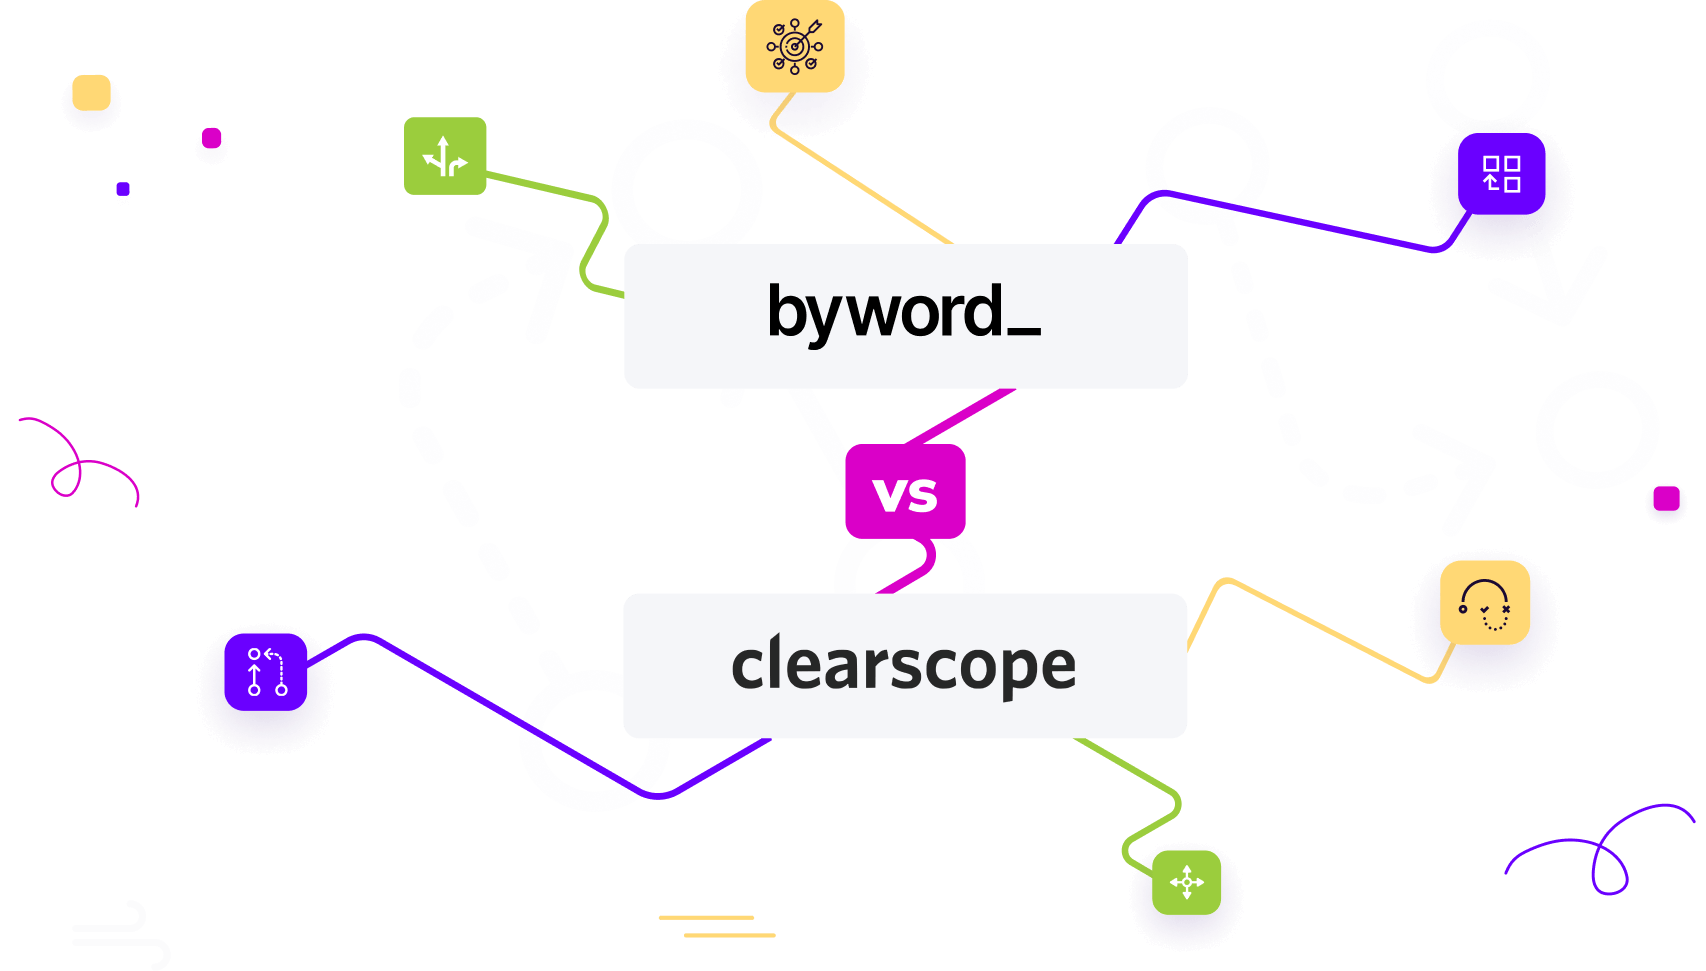 byword vs clearscope